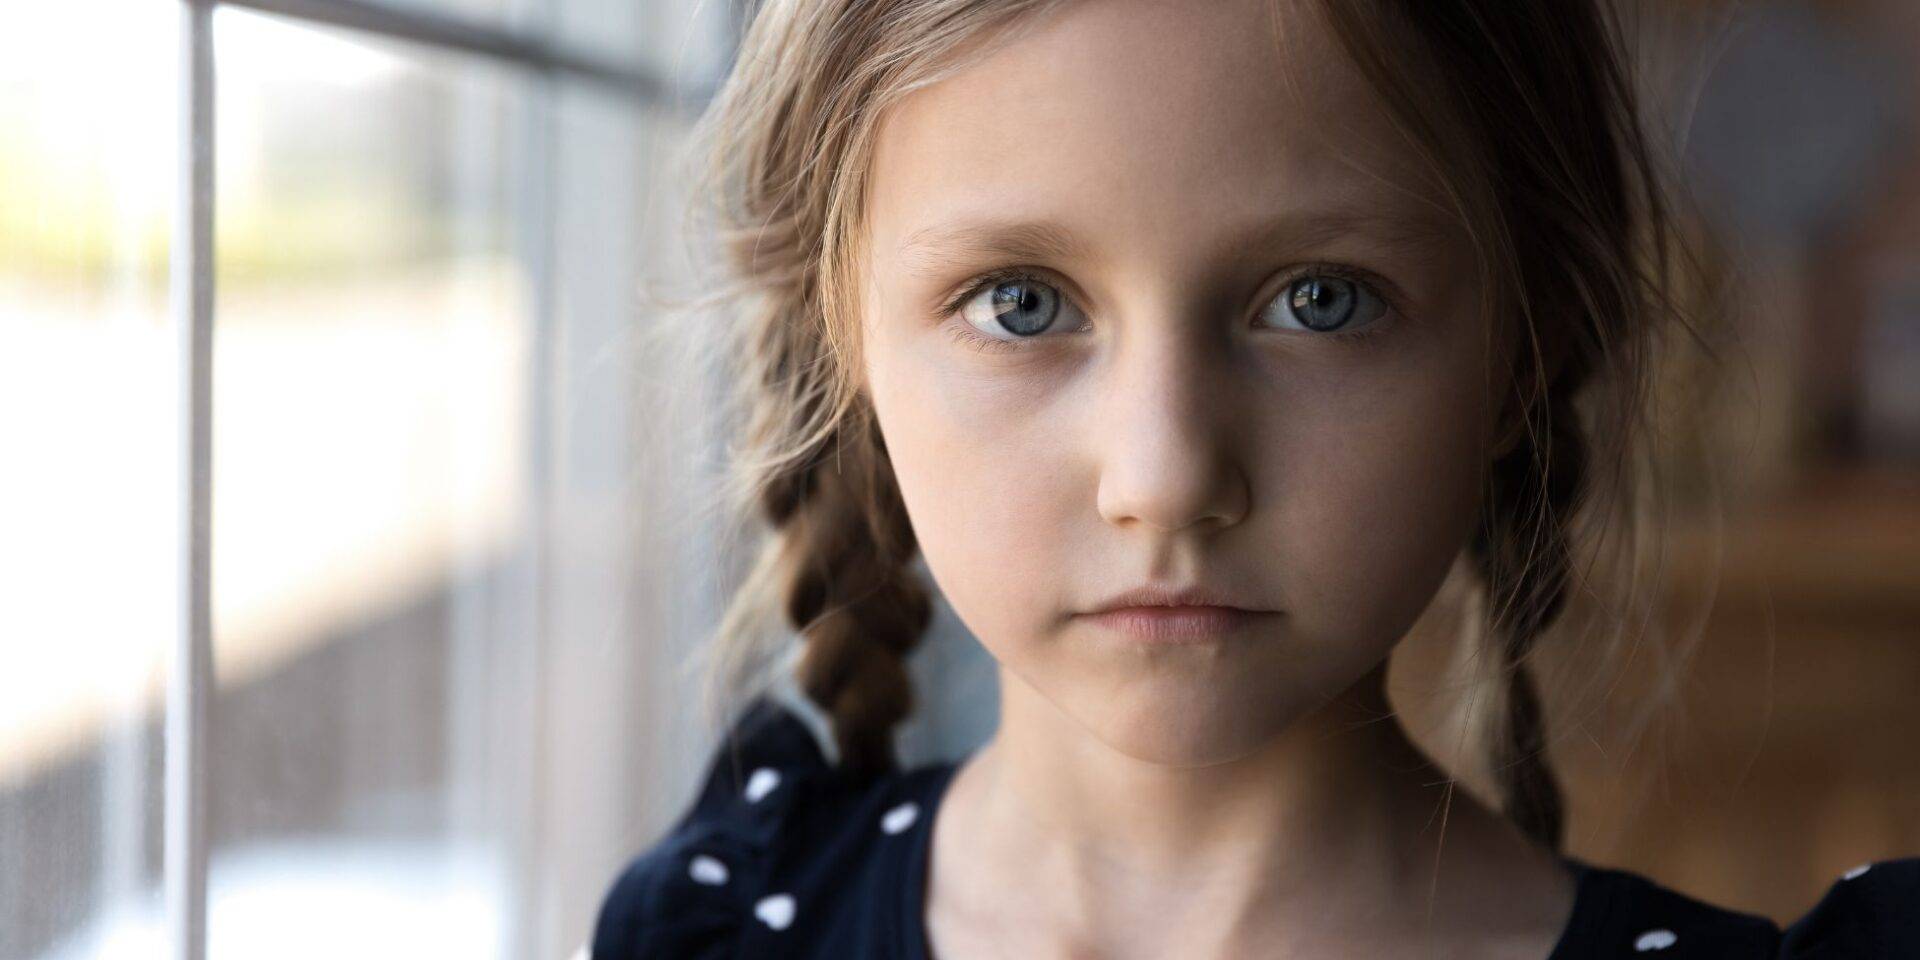 A young girl looking at the camera